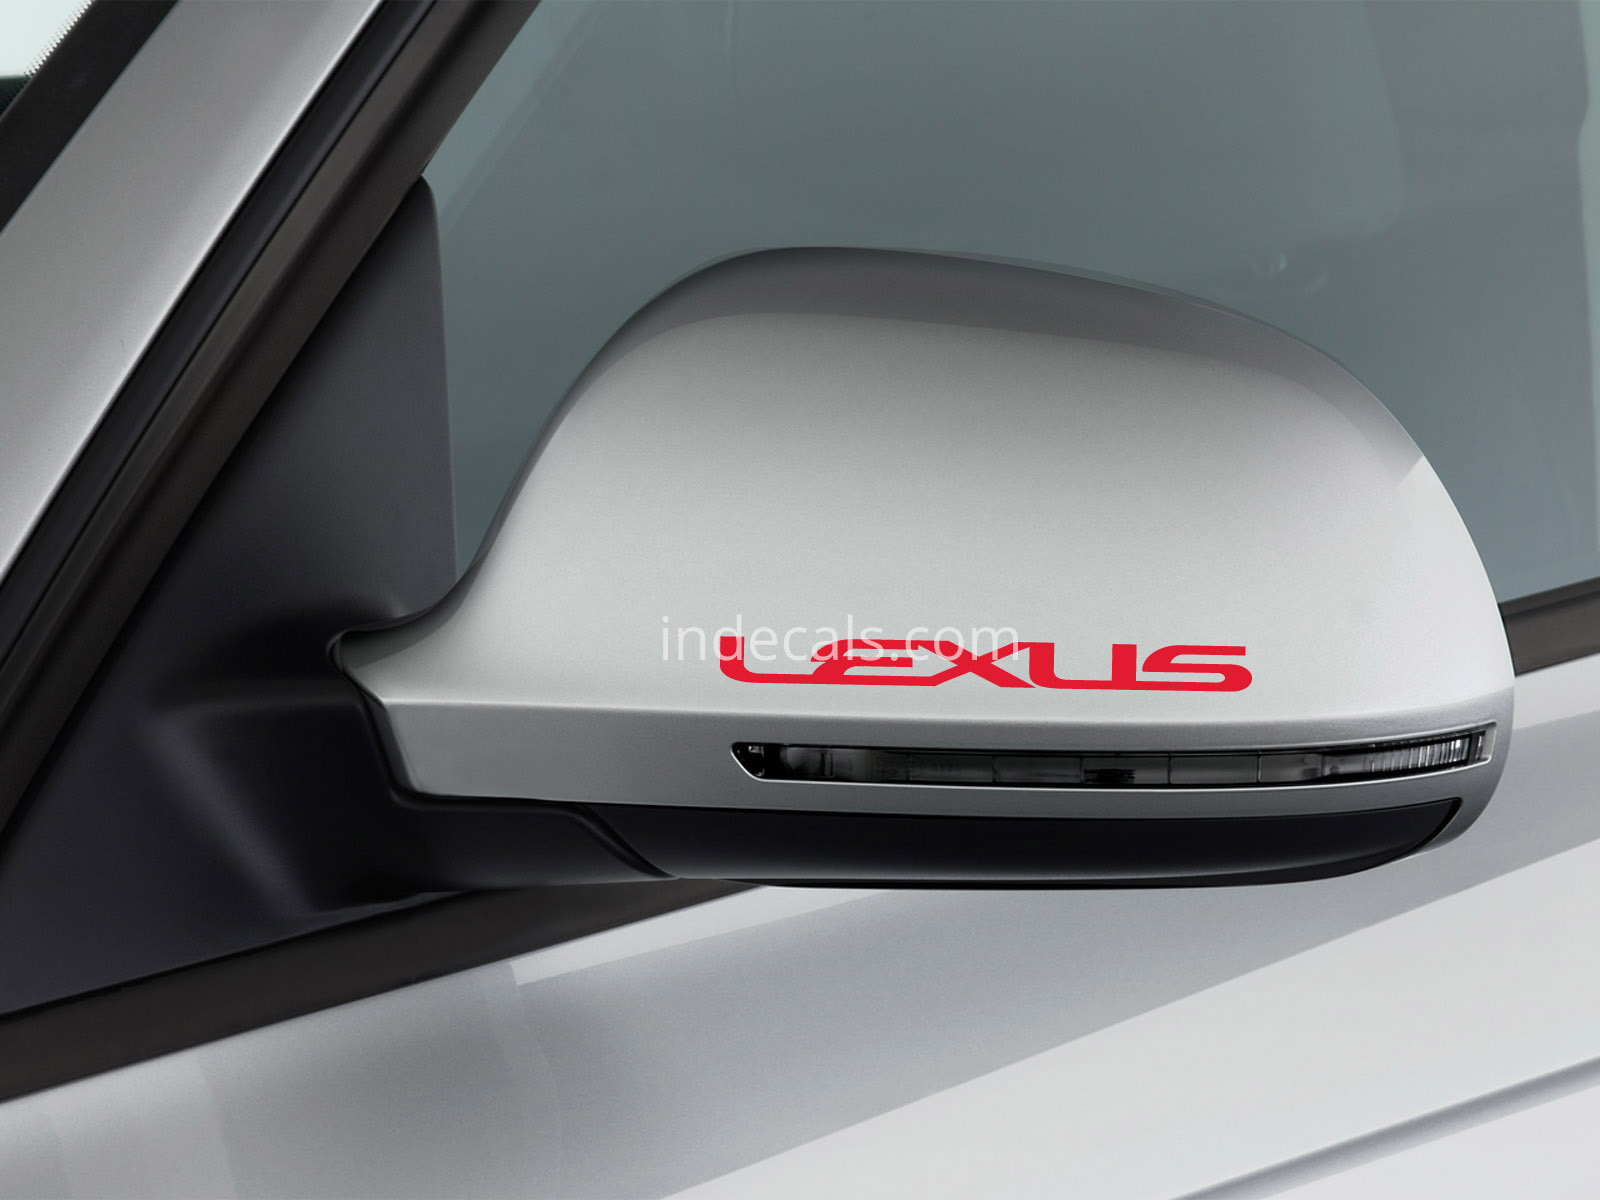 3 x Lexus Stickers for Mirrors - Red